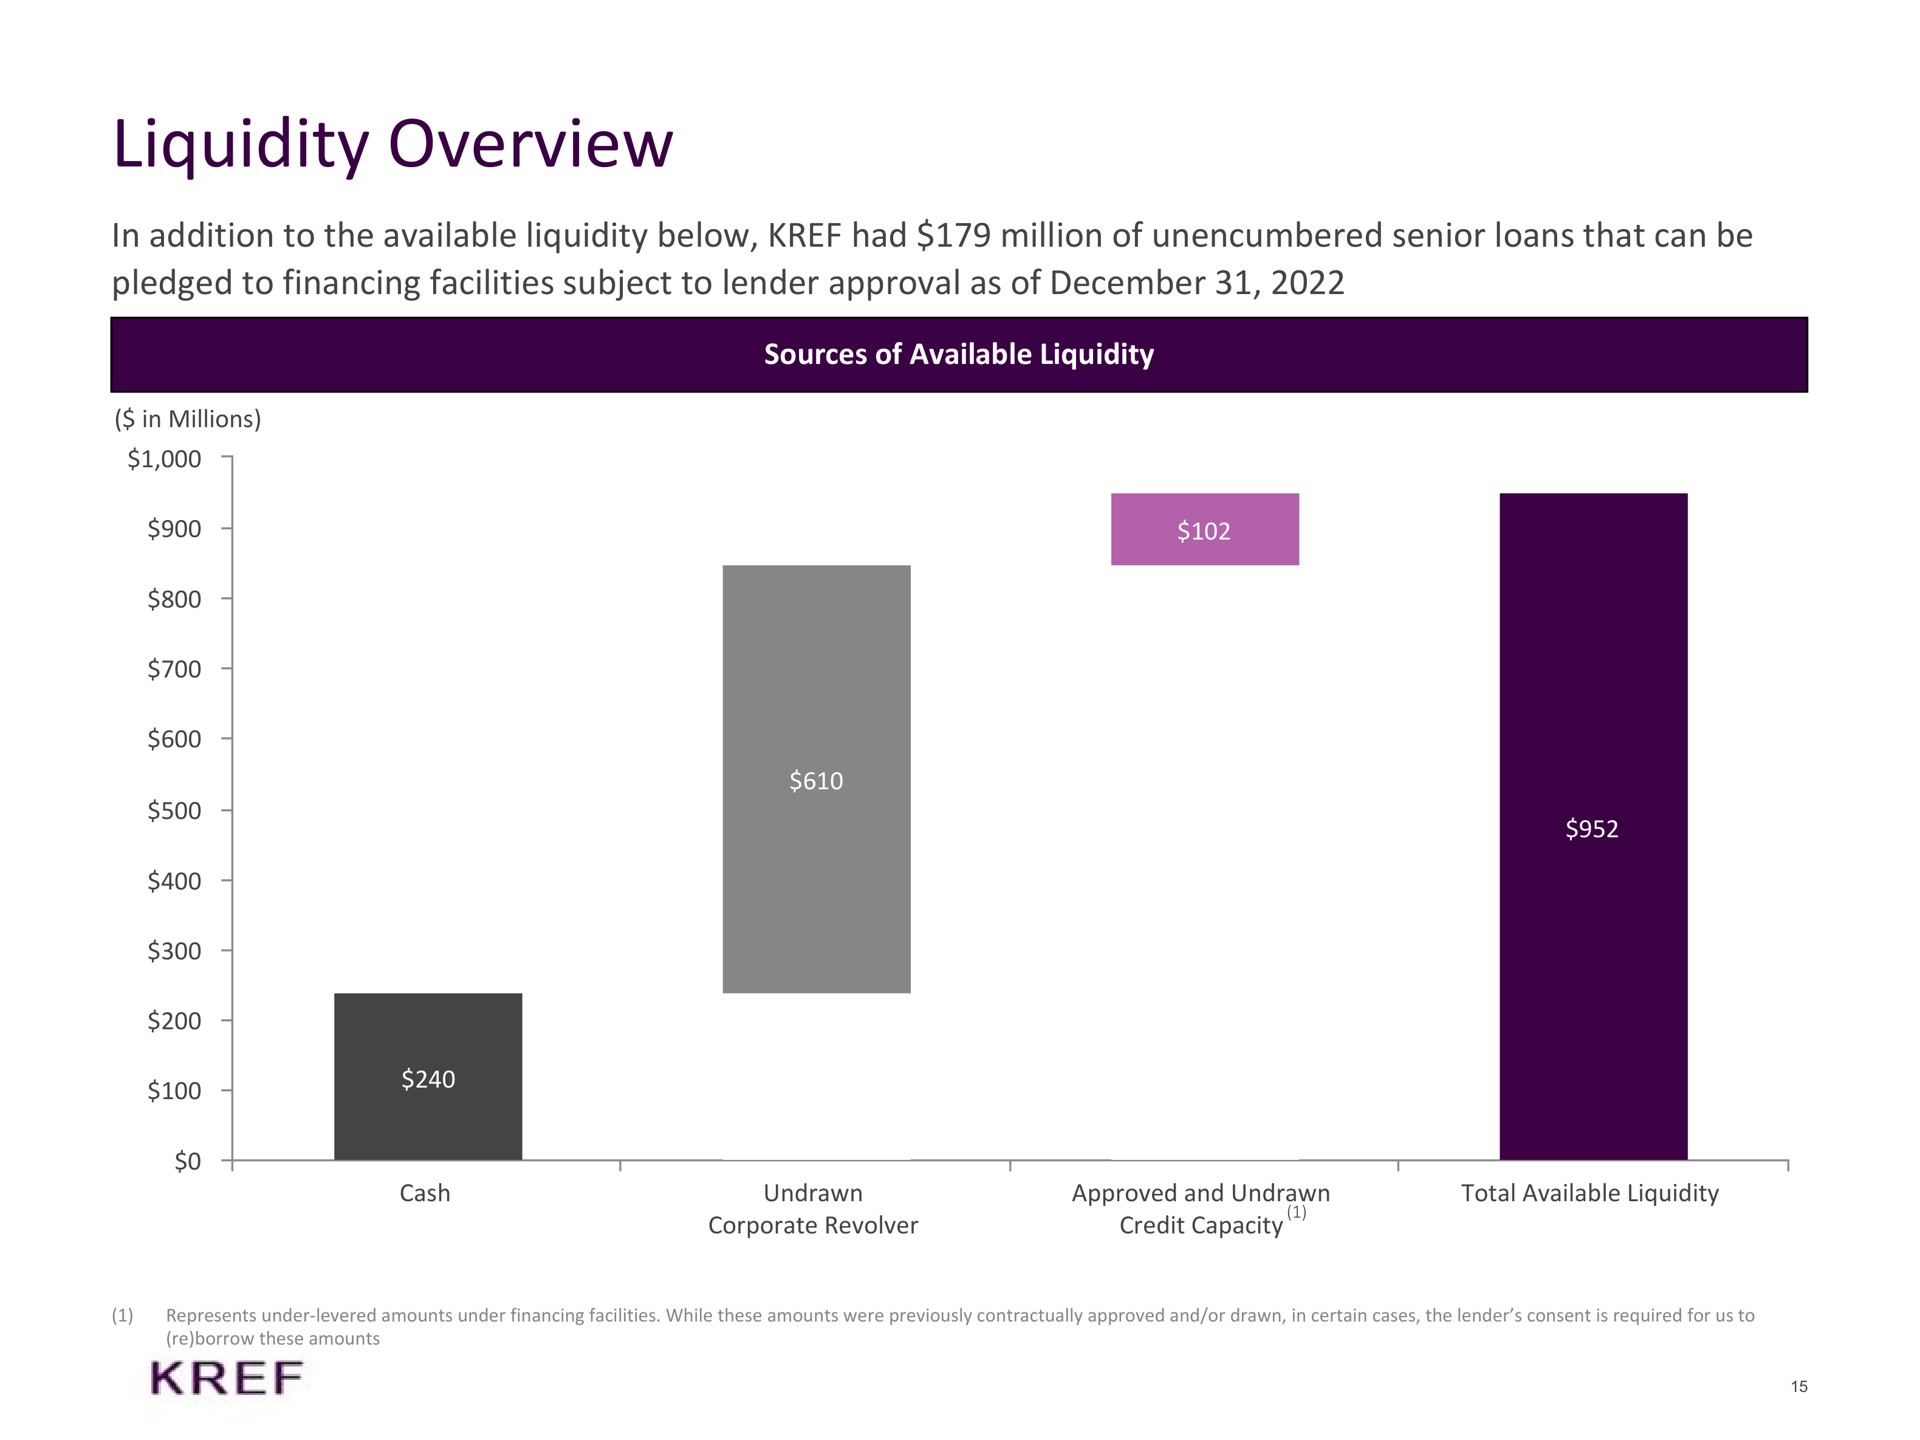 liquidity overview in addition to the available liquidity below had million of unencumbered senior loans that can be pledged to financing facilities subject to lender approval as of sources of available liquidity is | KKR Real Estate Finance Trust